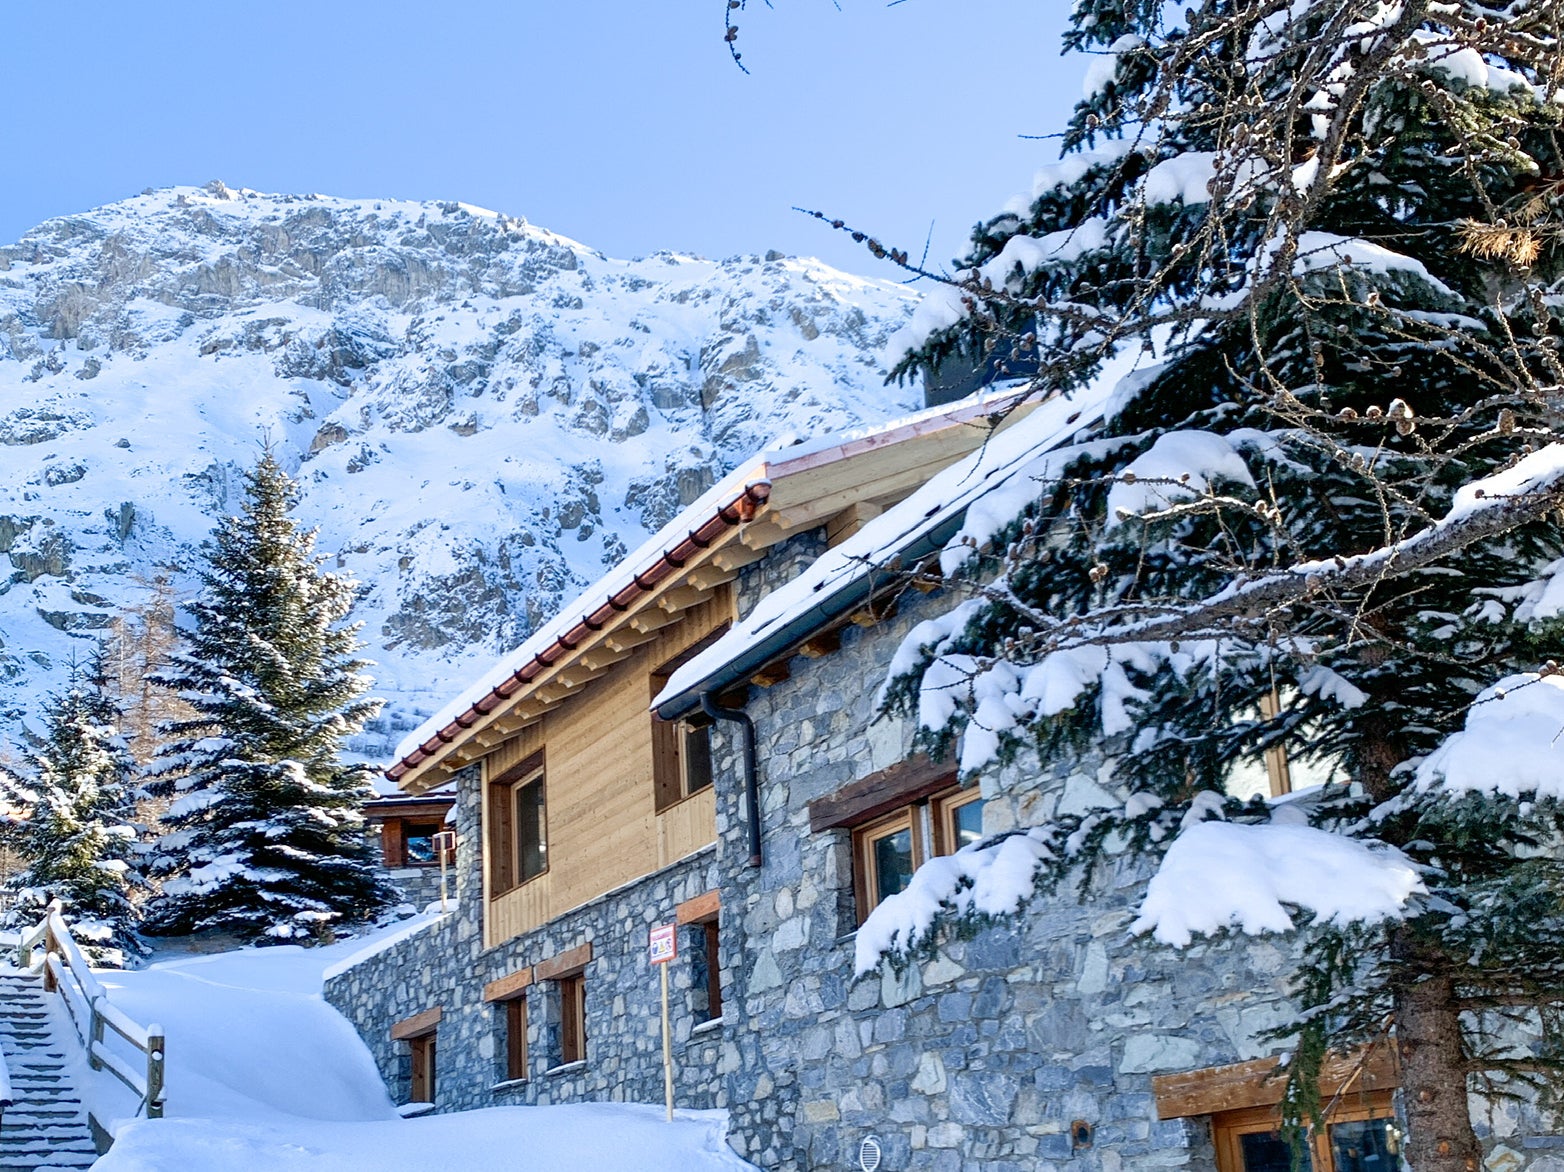 A taste of luxury at Chalet Blackcomb